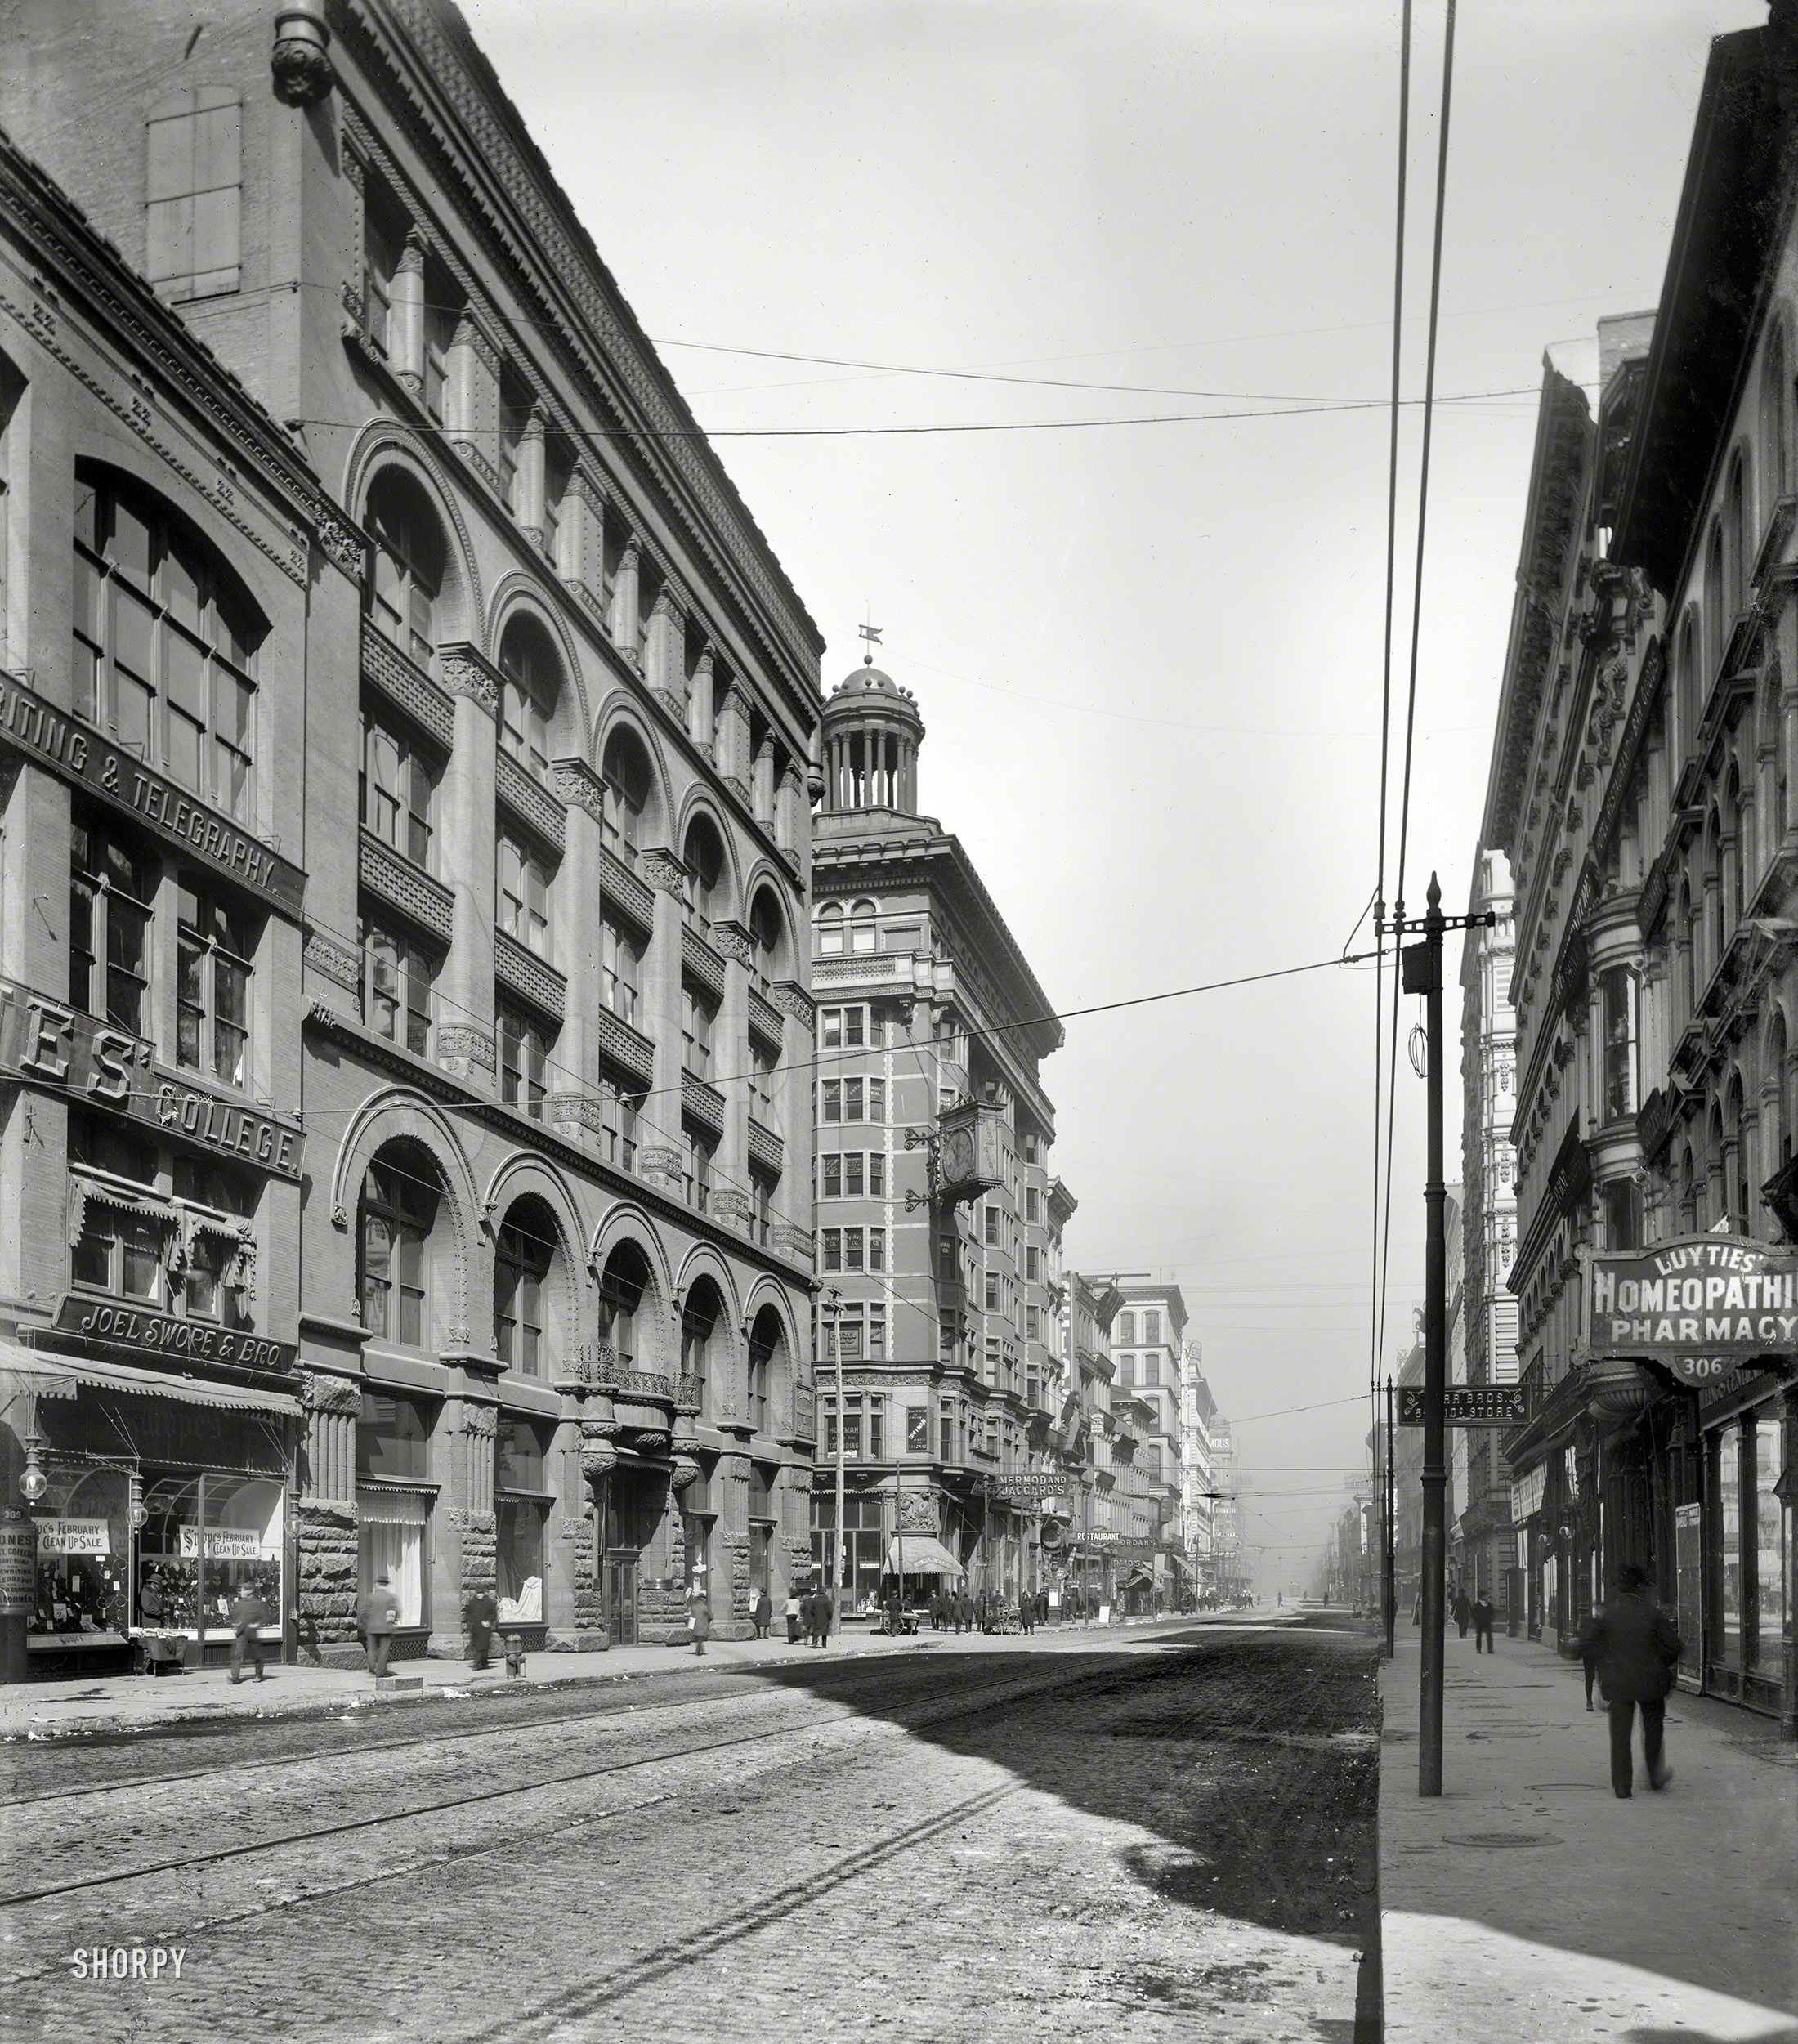 St. Louis, Missouri, circa 1900. "Broadway north from Olive Street." A nice view of the Homeopathic Pharmacy sign. 8x10 glass negative. View full size.